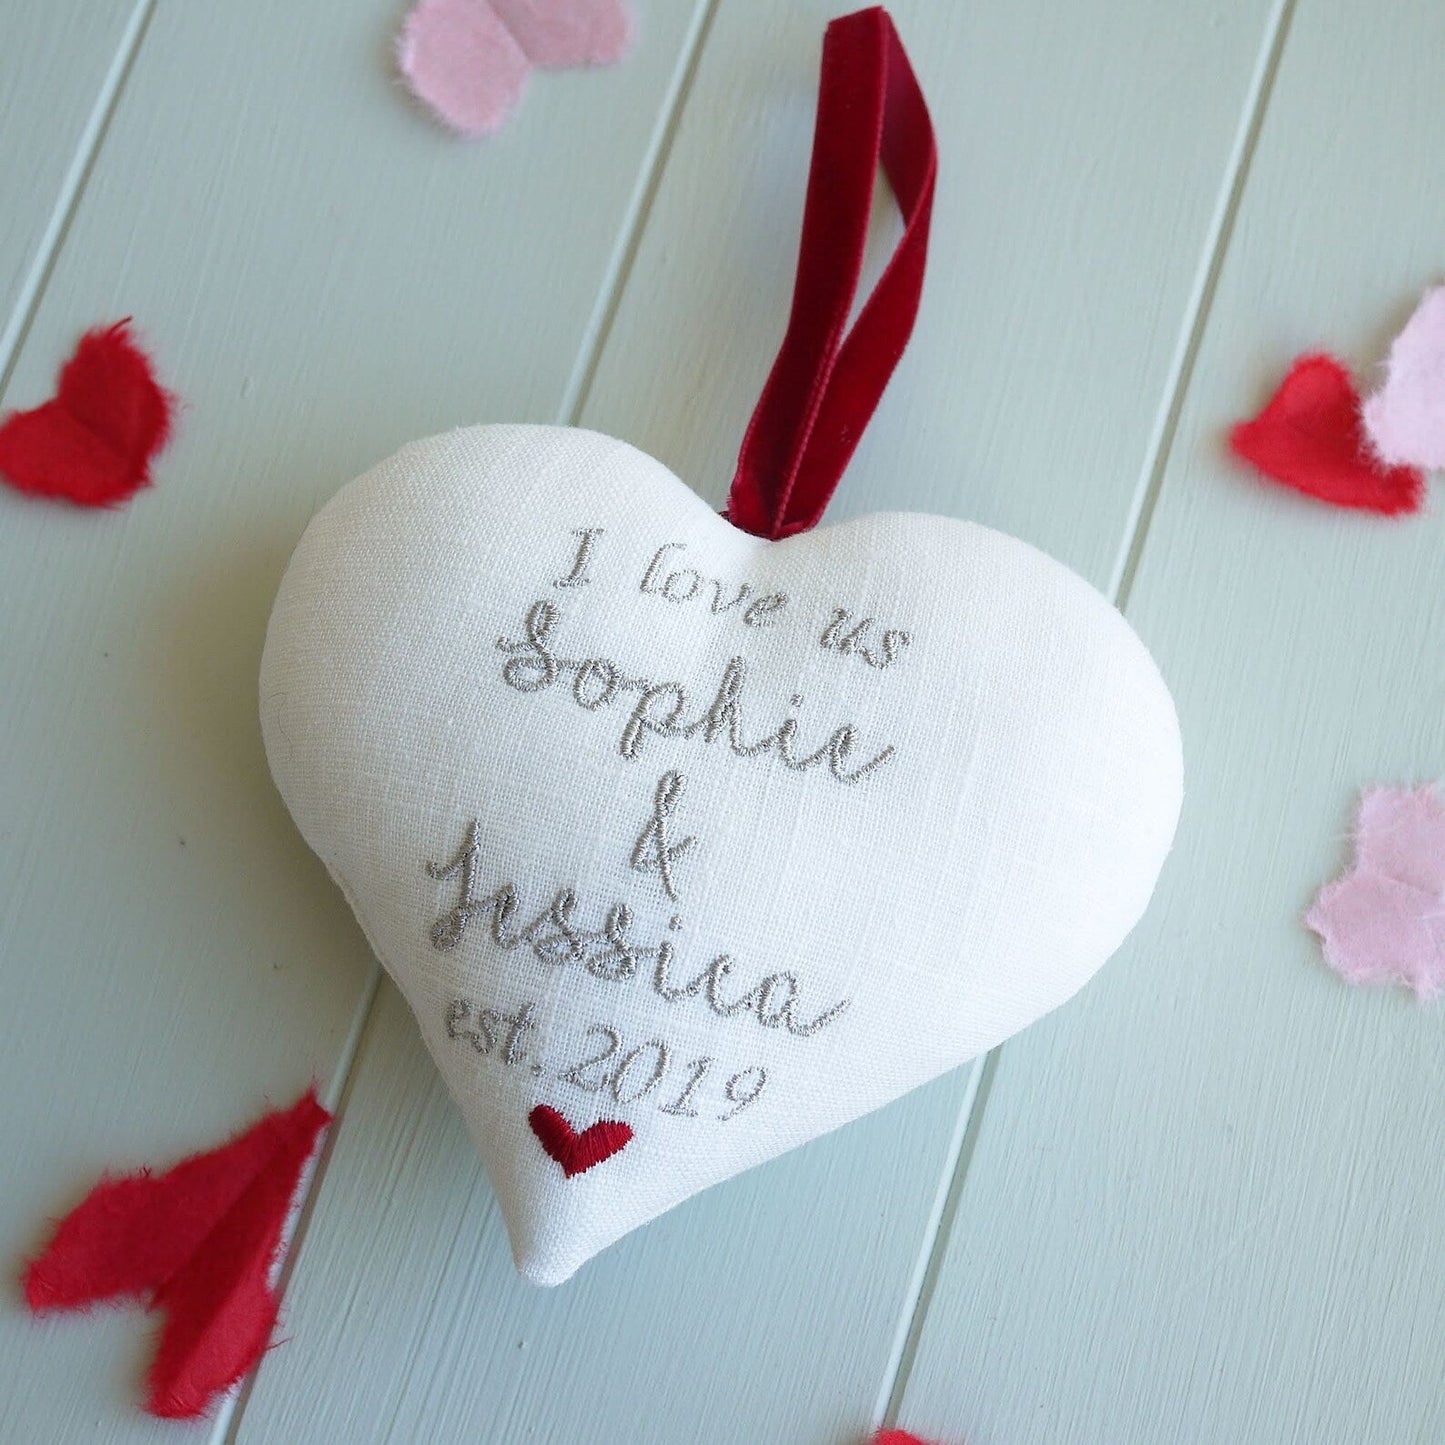 Valentines Day ’I Love Us’ Gift Heart with Porcelain Heart Decoration Personalised Valentine’s Day Gifts